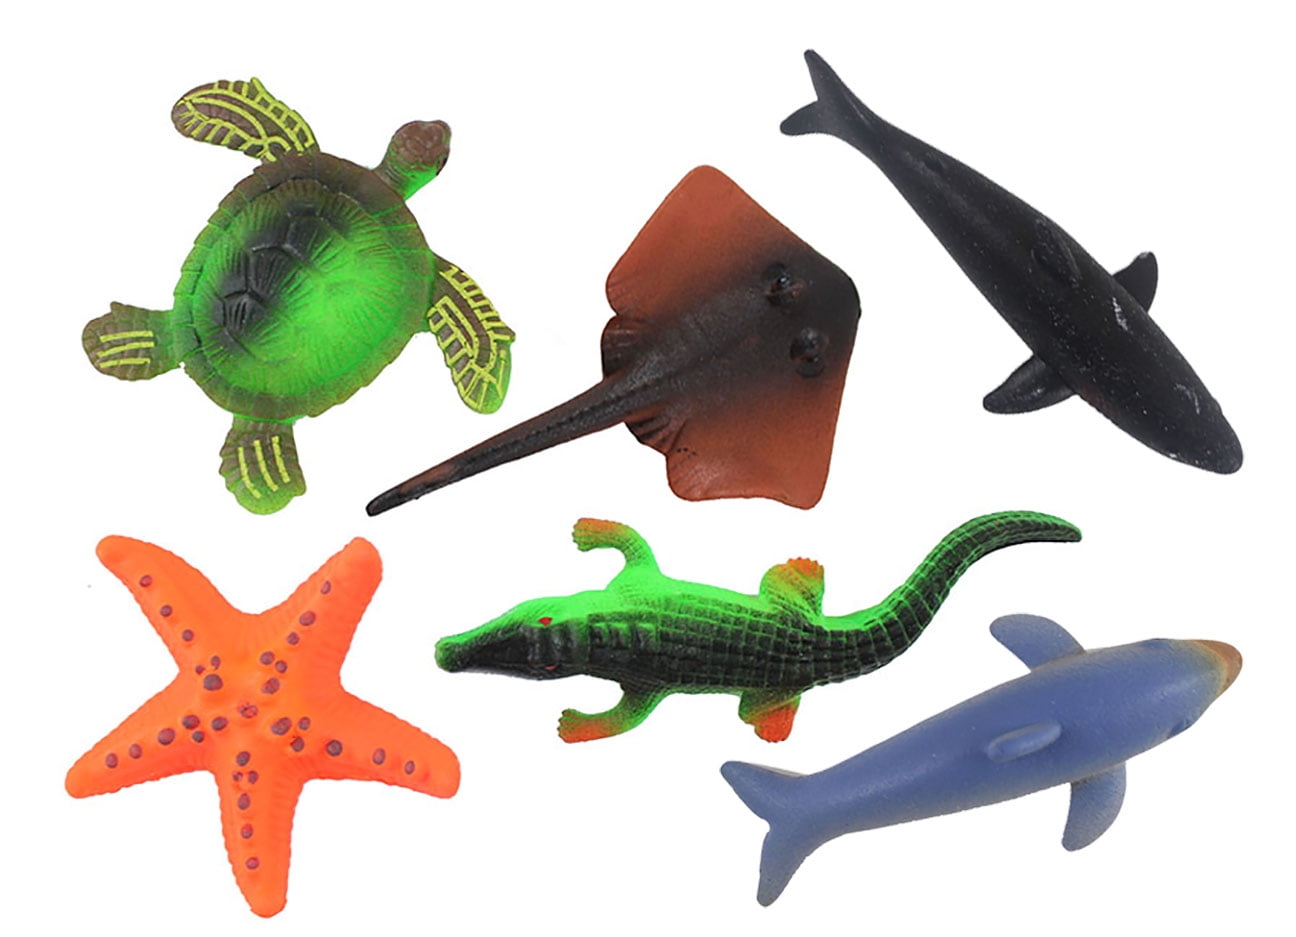 Details about   10X Magical Growing In Water Sea Creature Animals Bulk Swell Toys Kid GH_wk 